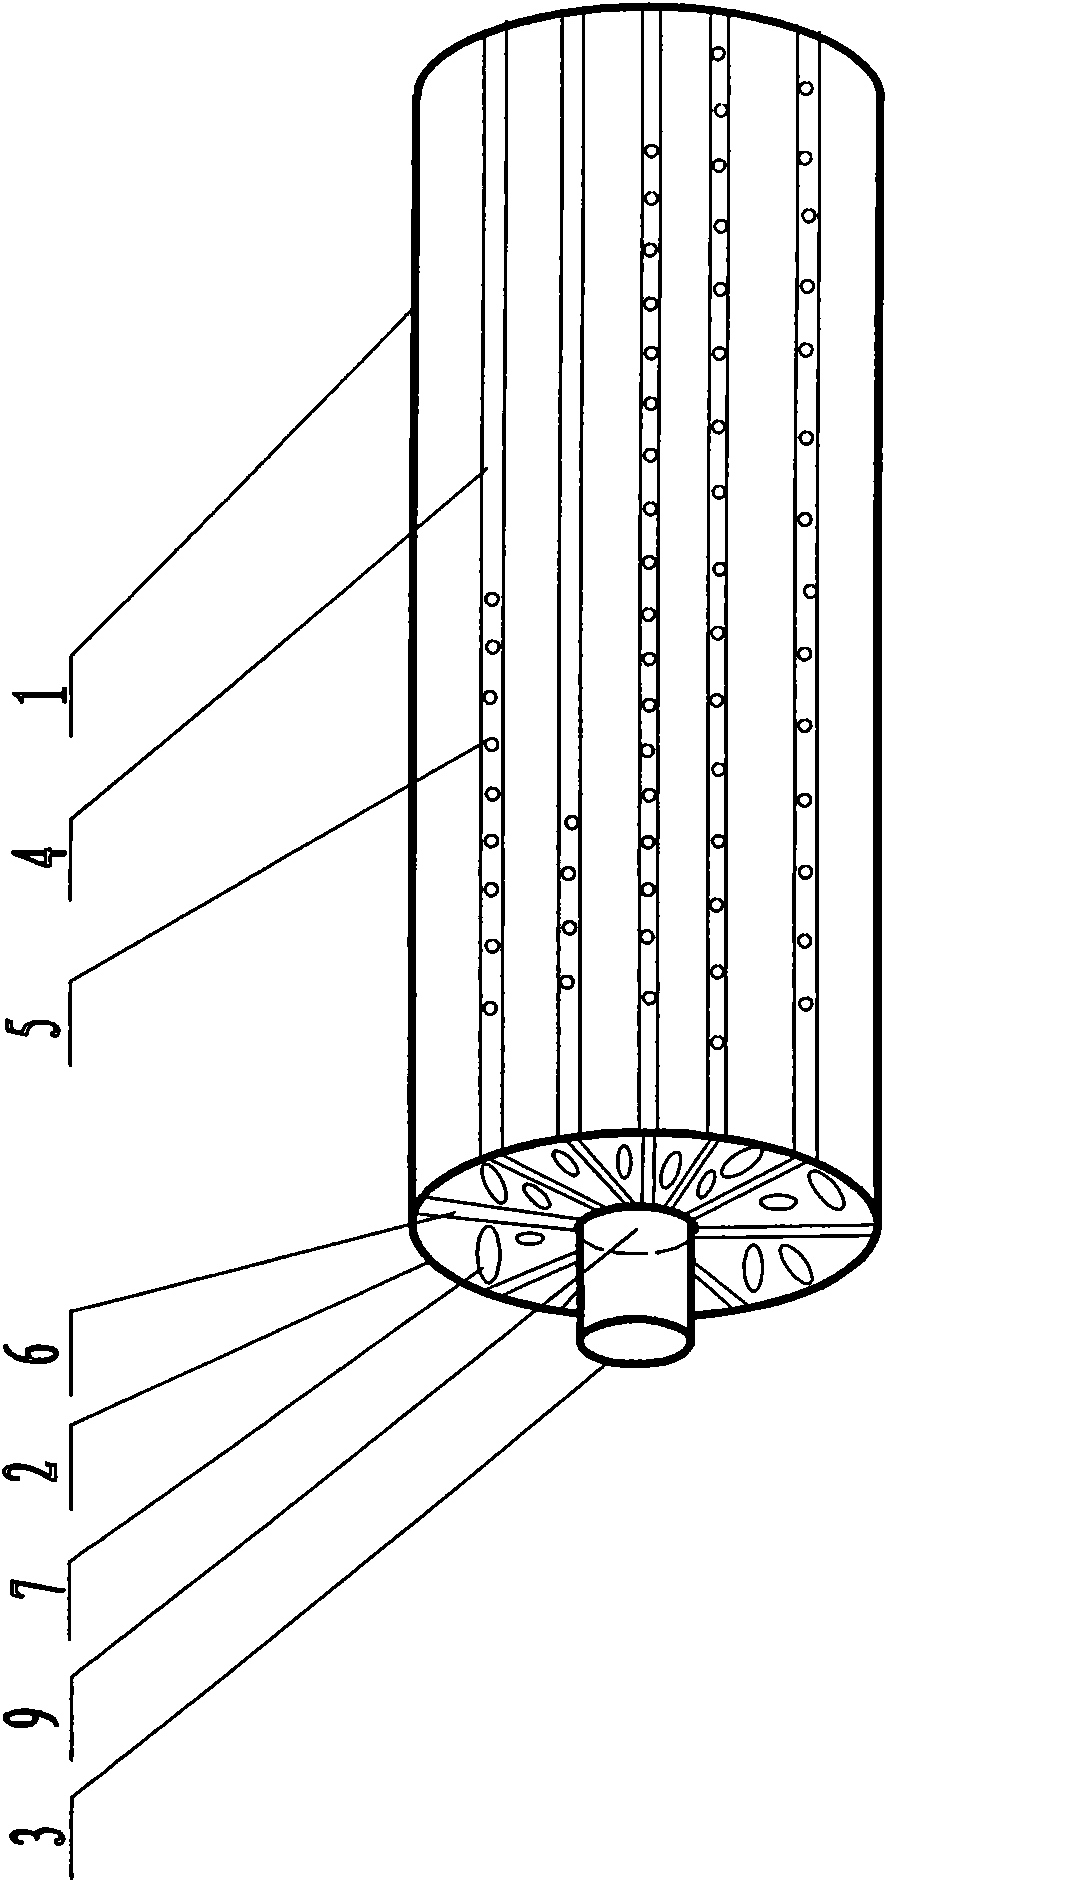 Edible fungus culturing method and special equipment thereof